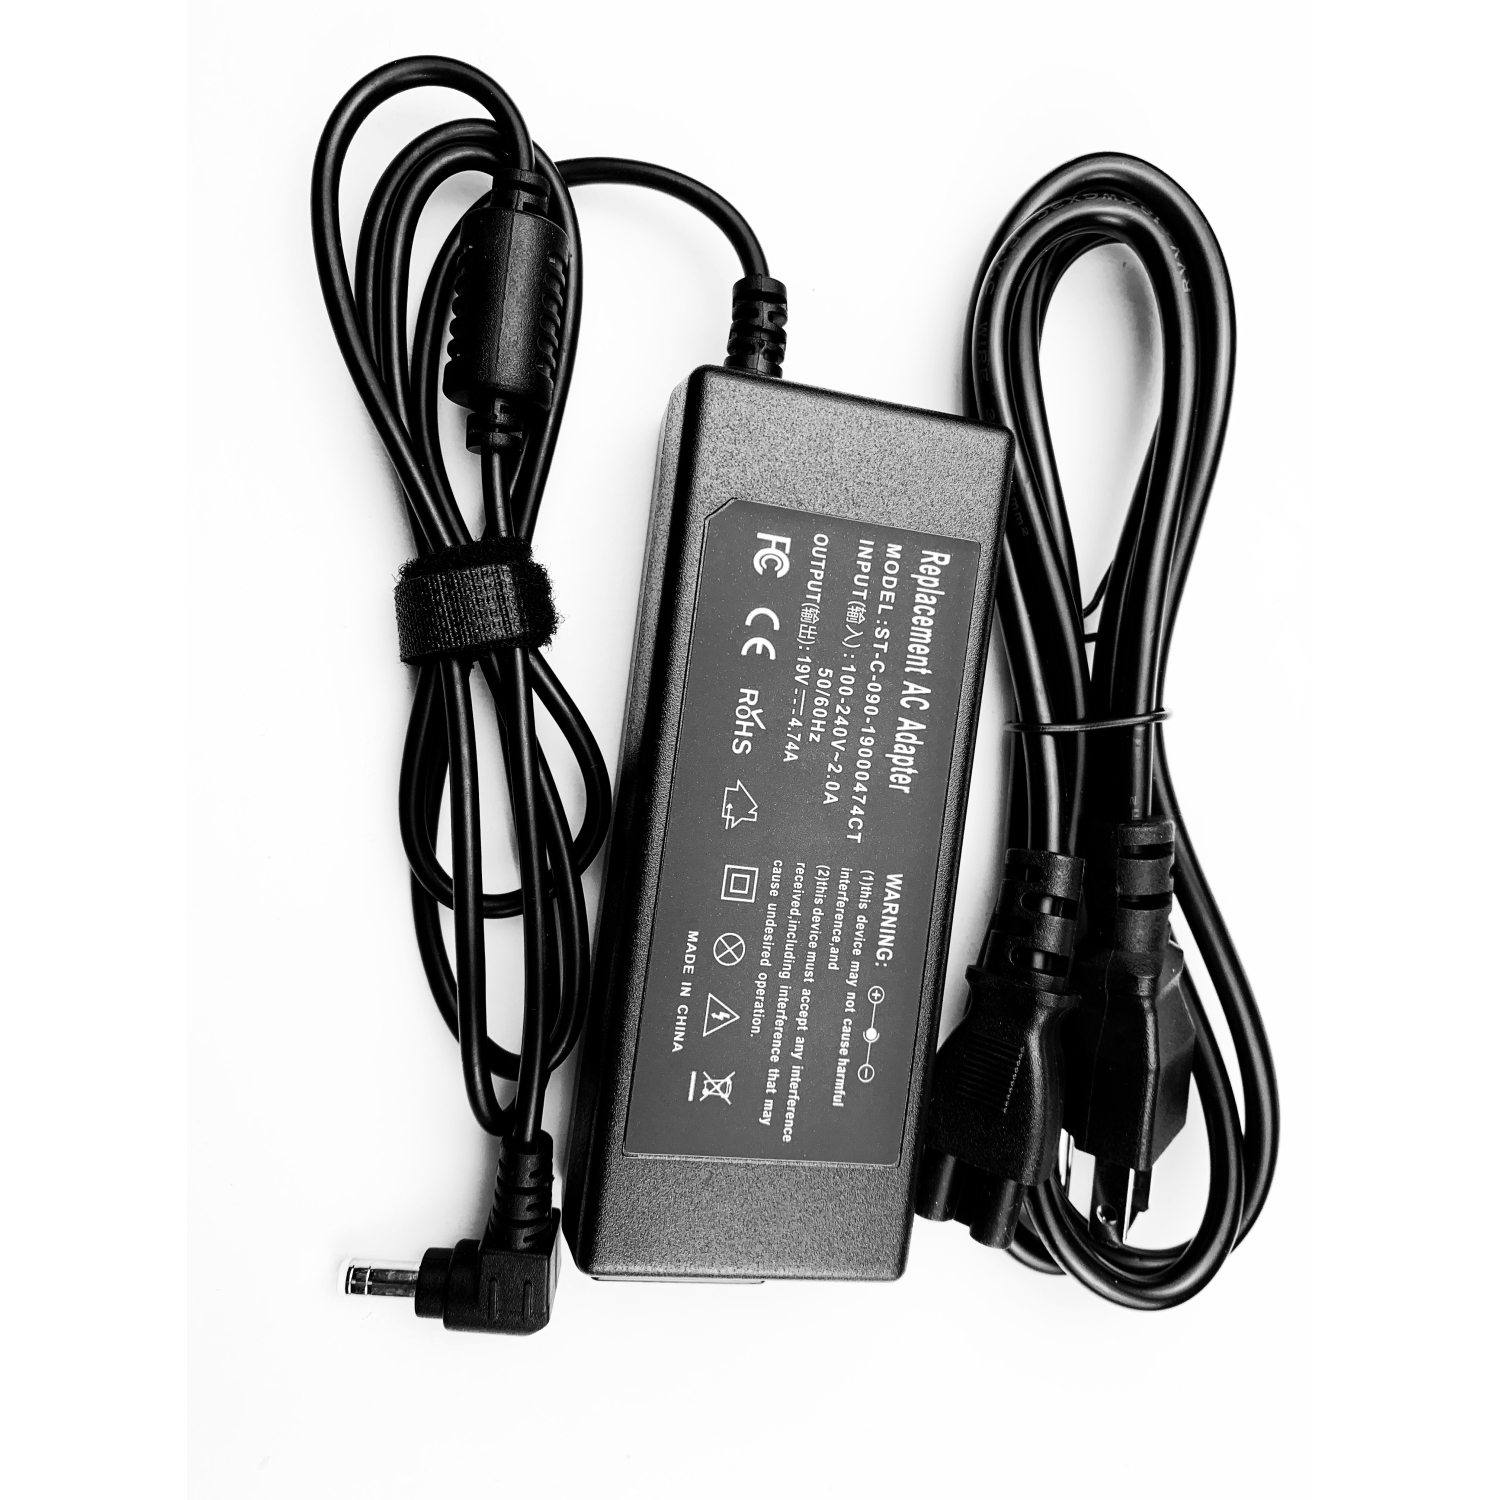 90W AC adapter power cord charger for Toshiba Satellite Pro P300-276 U400-18B U400-S1001V